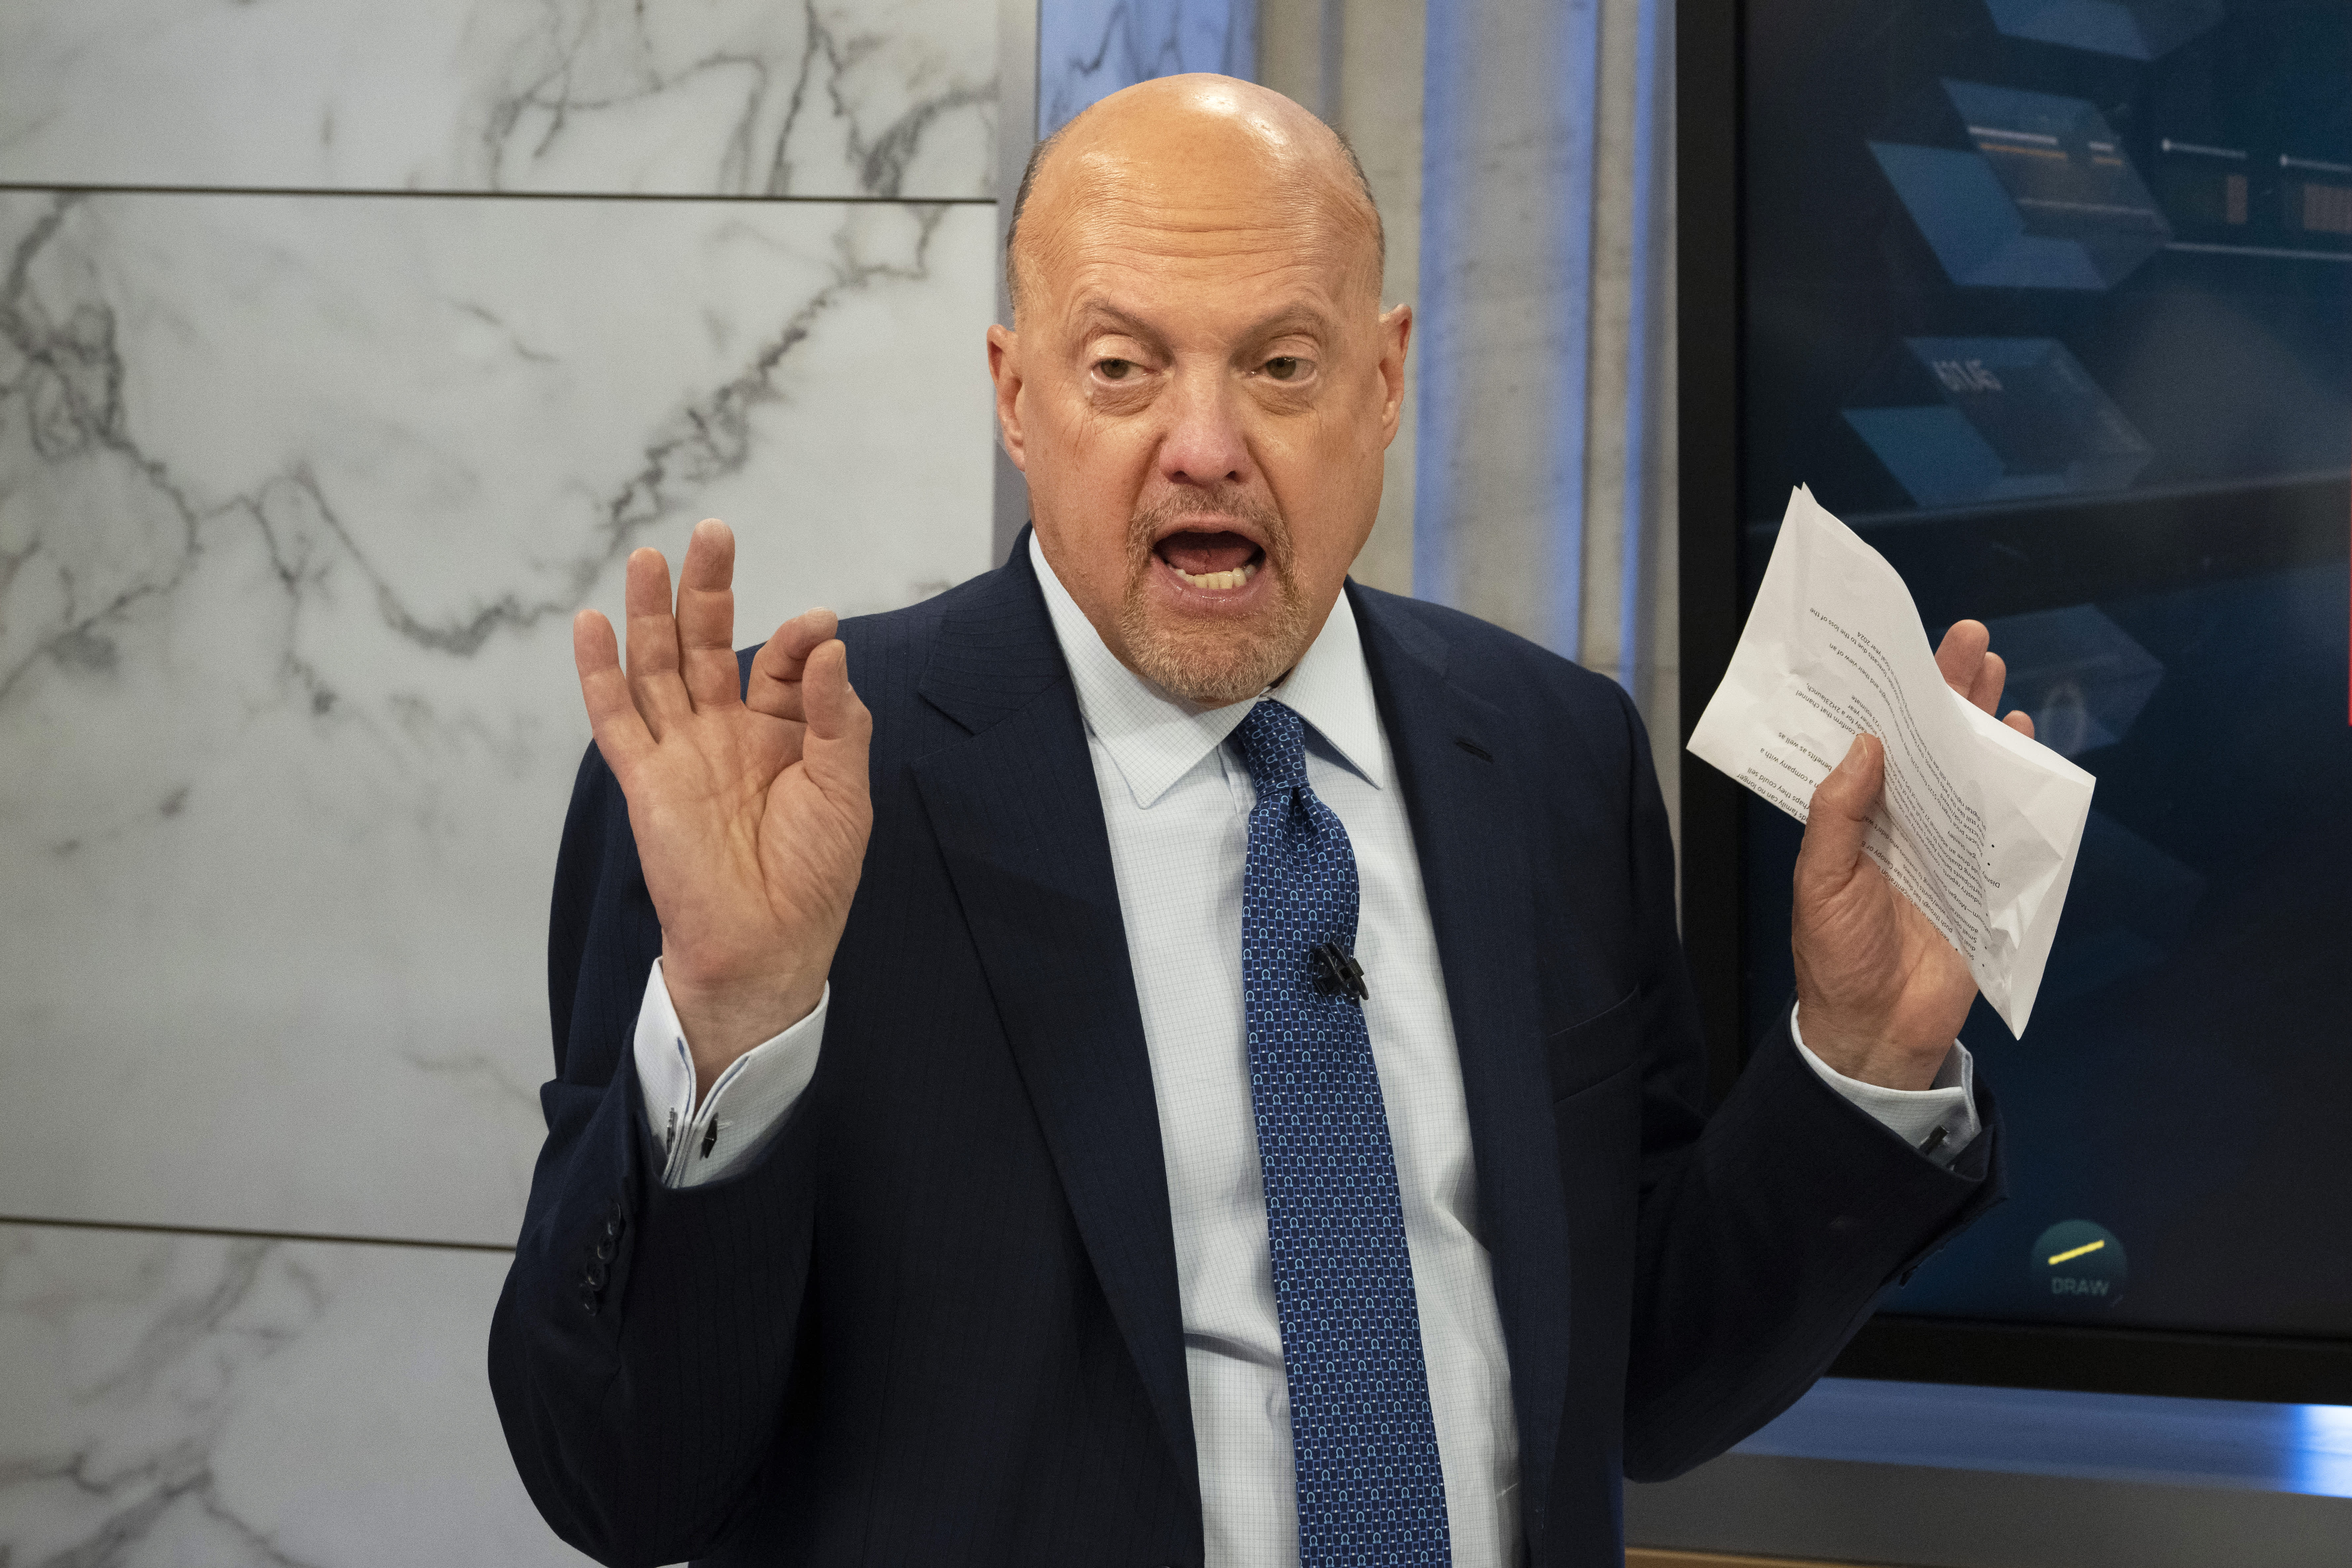 Jim Cramer's Investing Club meeting Tuesday: 2023 mantra, infrastructure stocks, Apple 